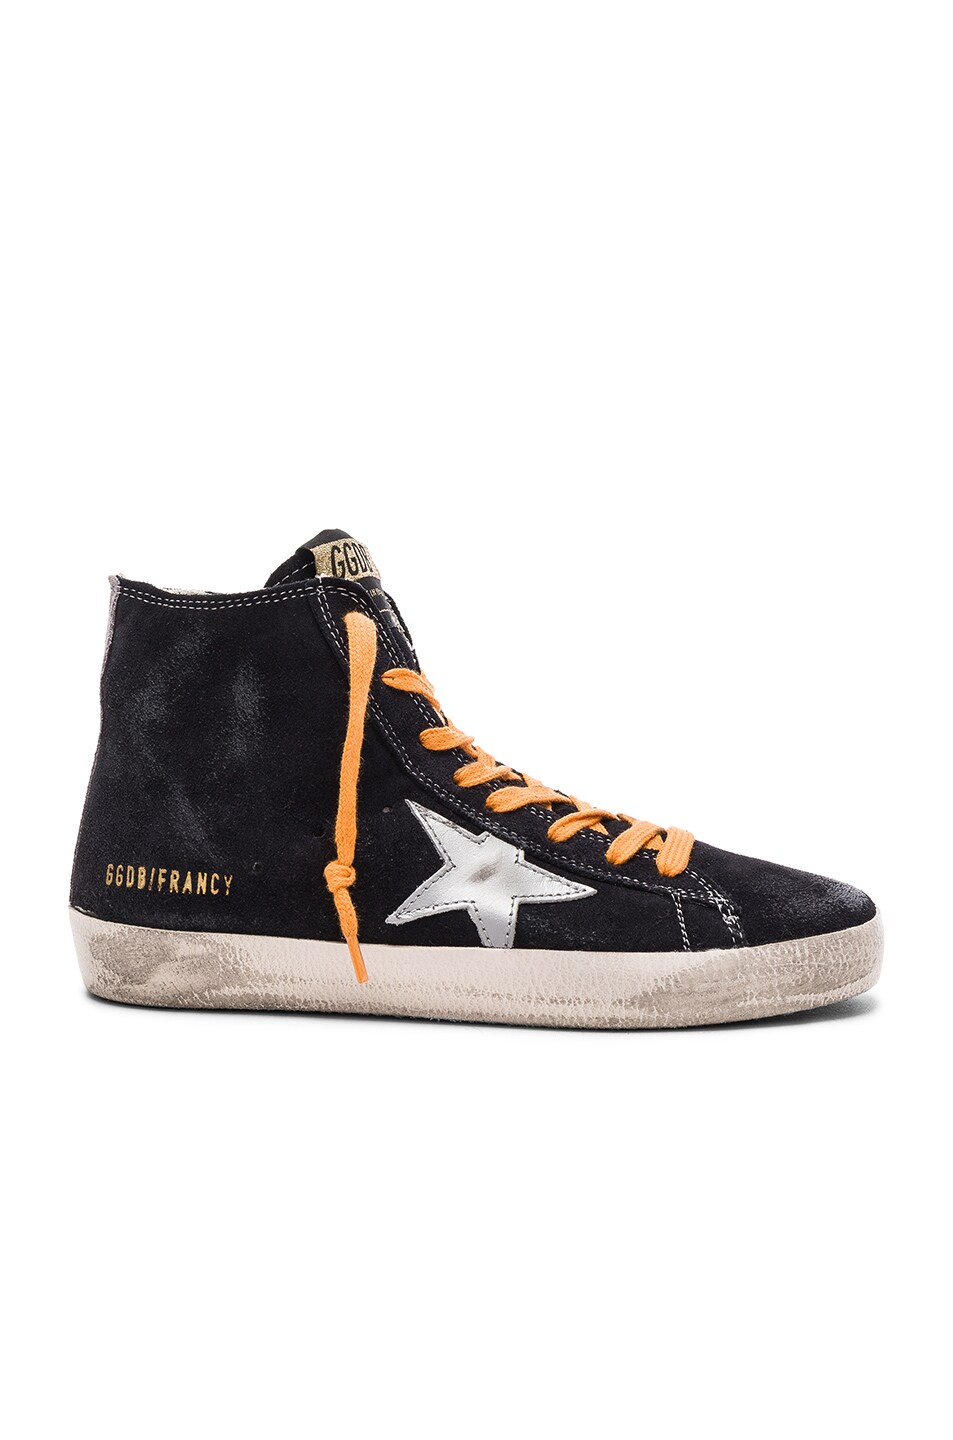 Image 1 of Golden Goose Suede Francy Sneakers in Blue Silver Star